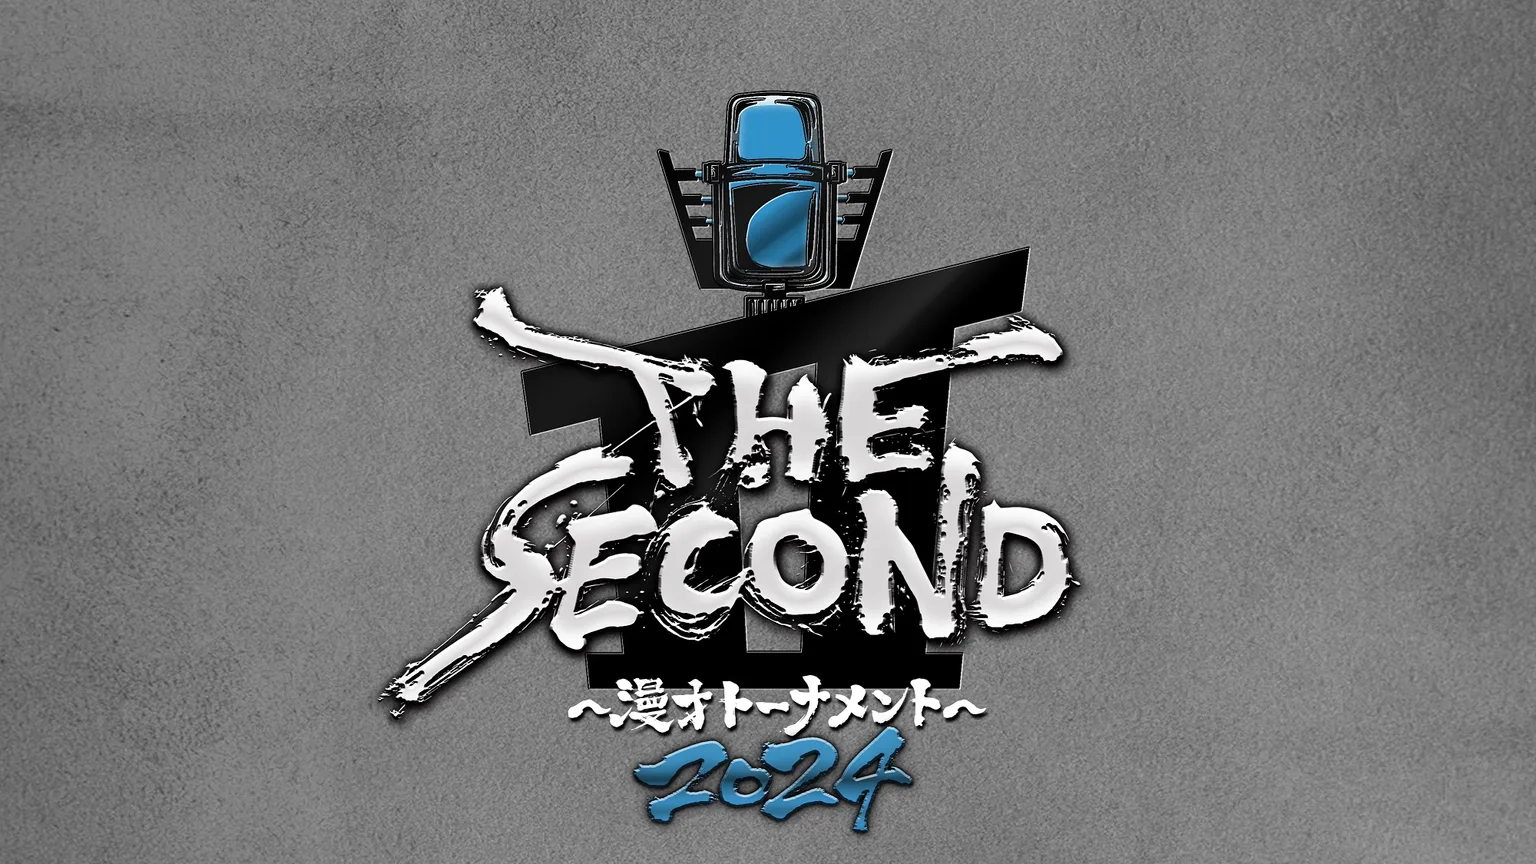 『THE SECOND～漫才トーナメント～』第2回大会の開催が決定！